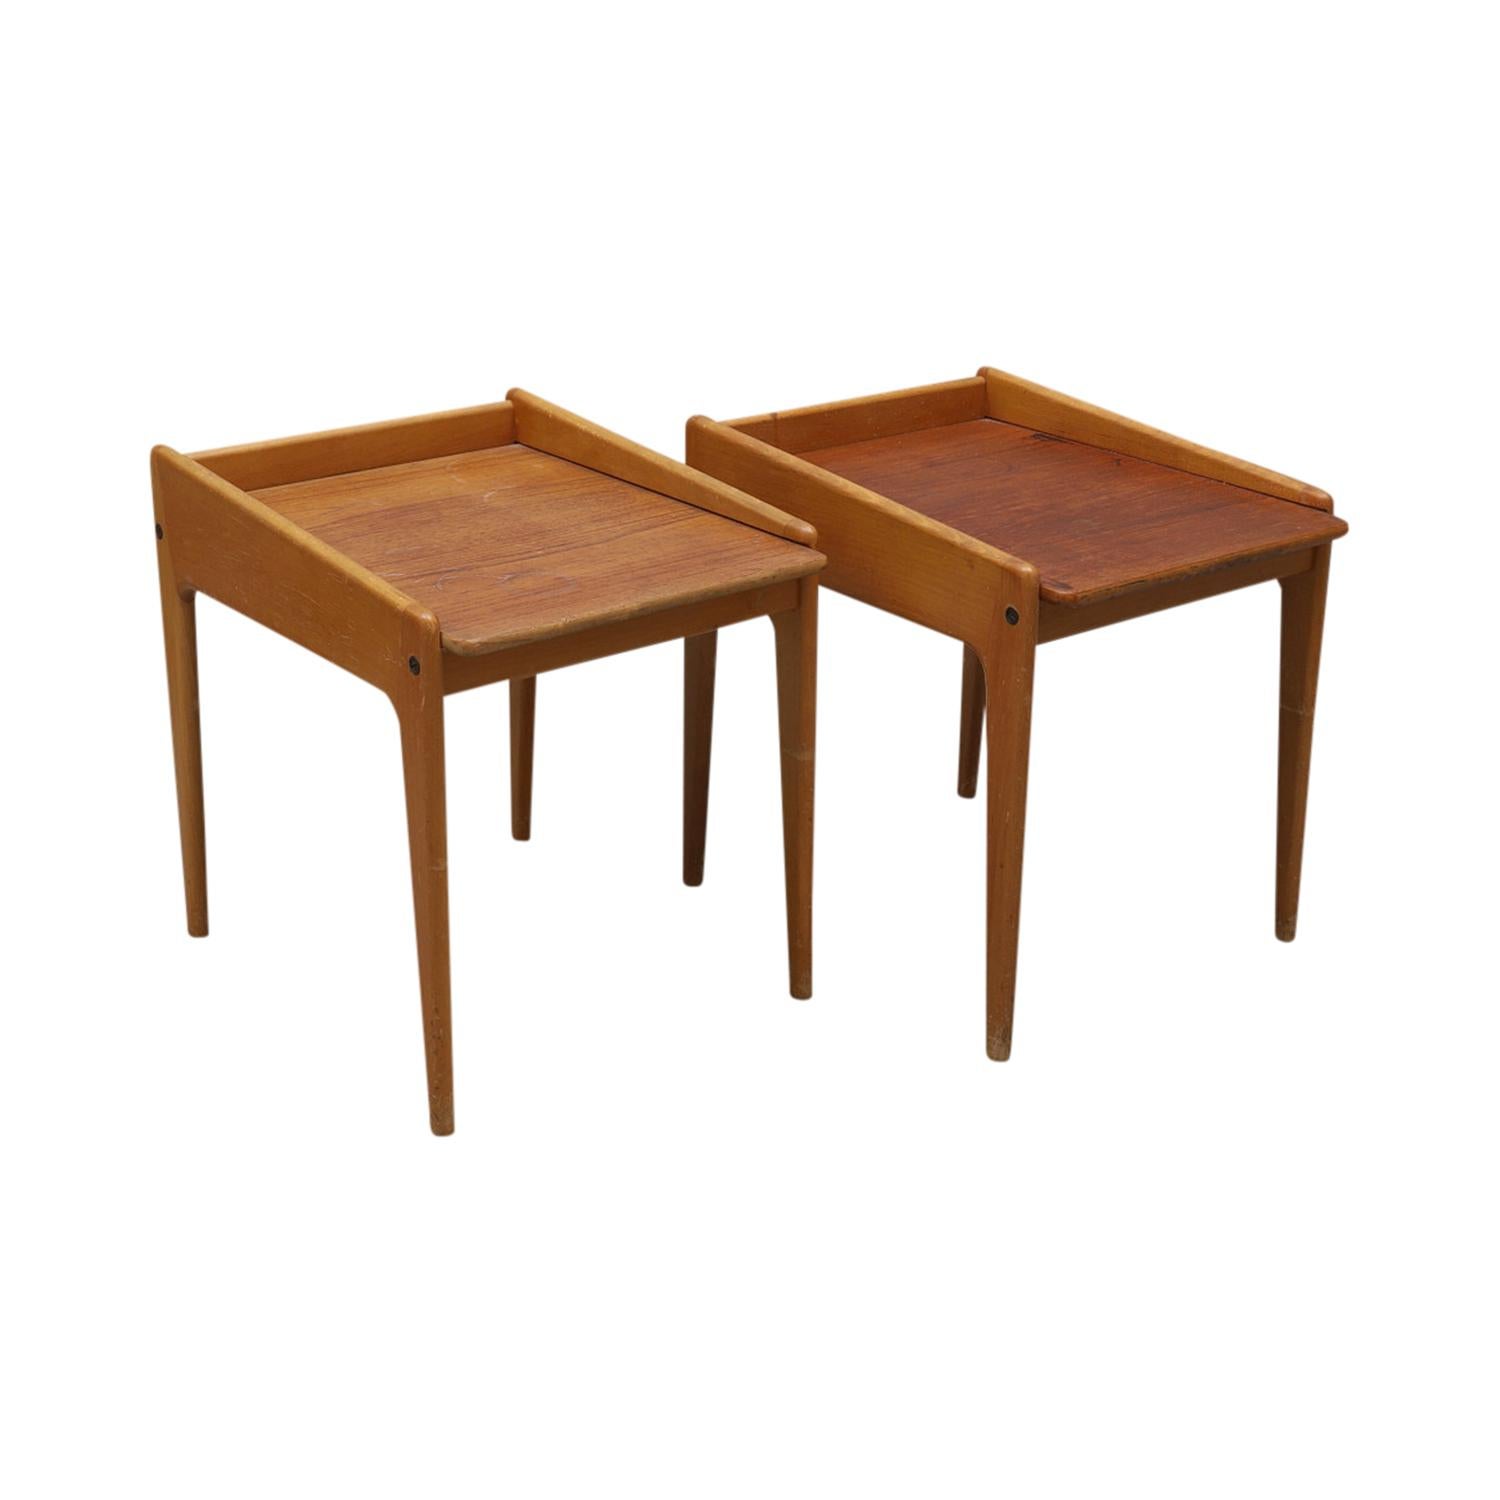 A light-brown, vintage Mid-Century Modern Danish pair of bedside tables made of hand crafted Beechwood and Oakwood, in good condition. The Scandinavian nightstands are composed with extendable boards, standing on four straight wooden legs. Wear